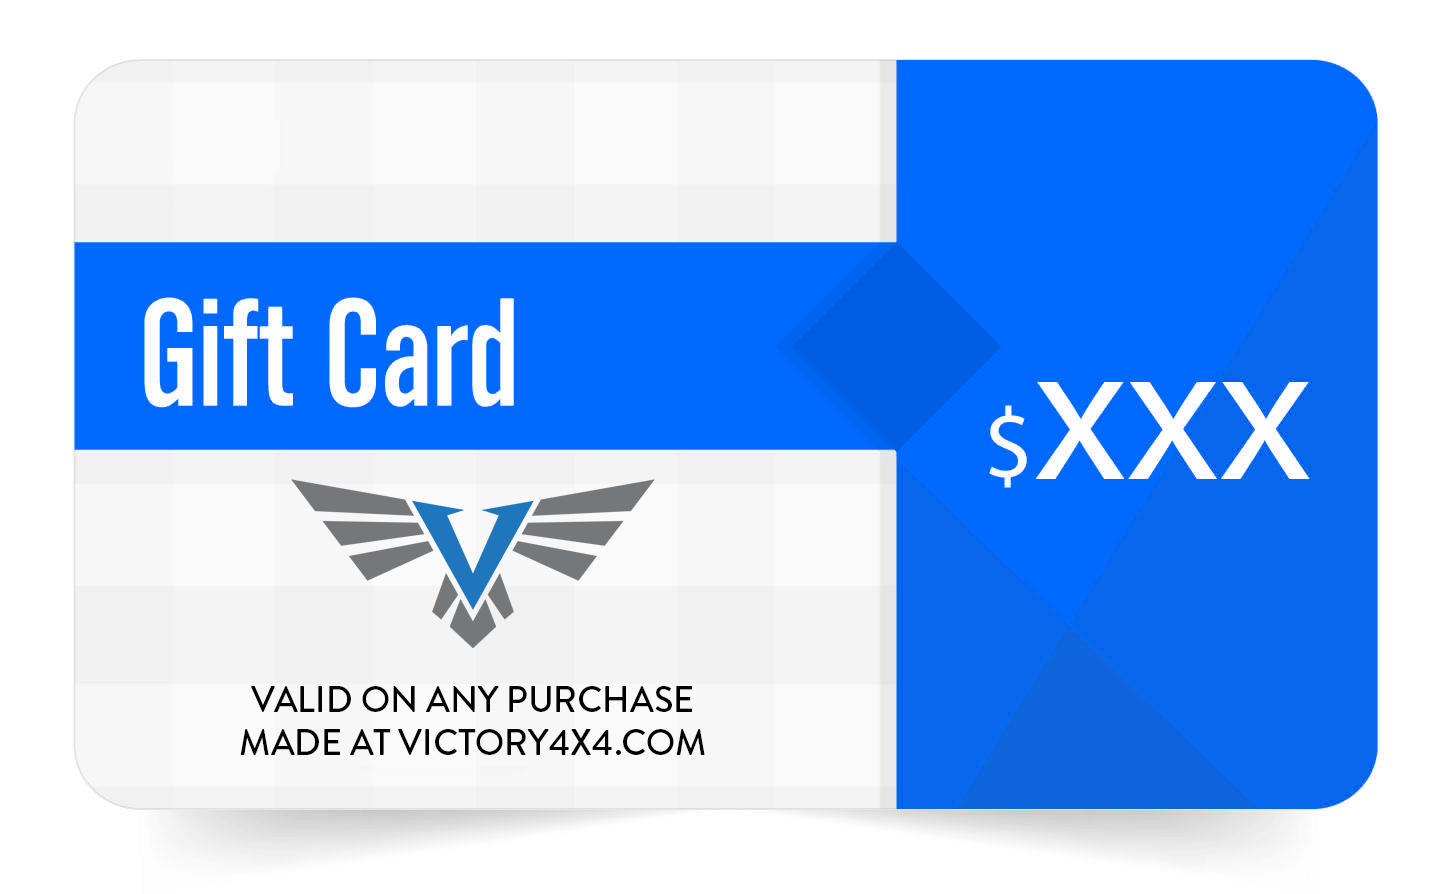 Victory 4x4 Gift Card